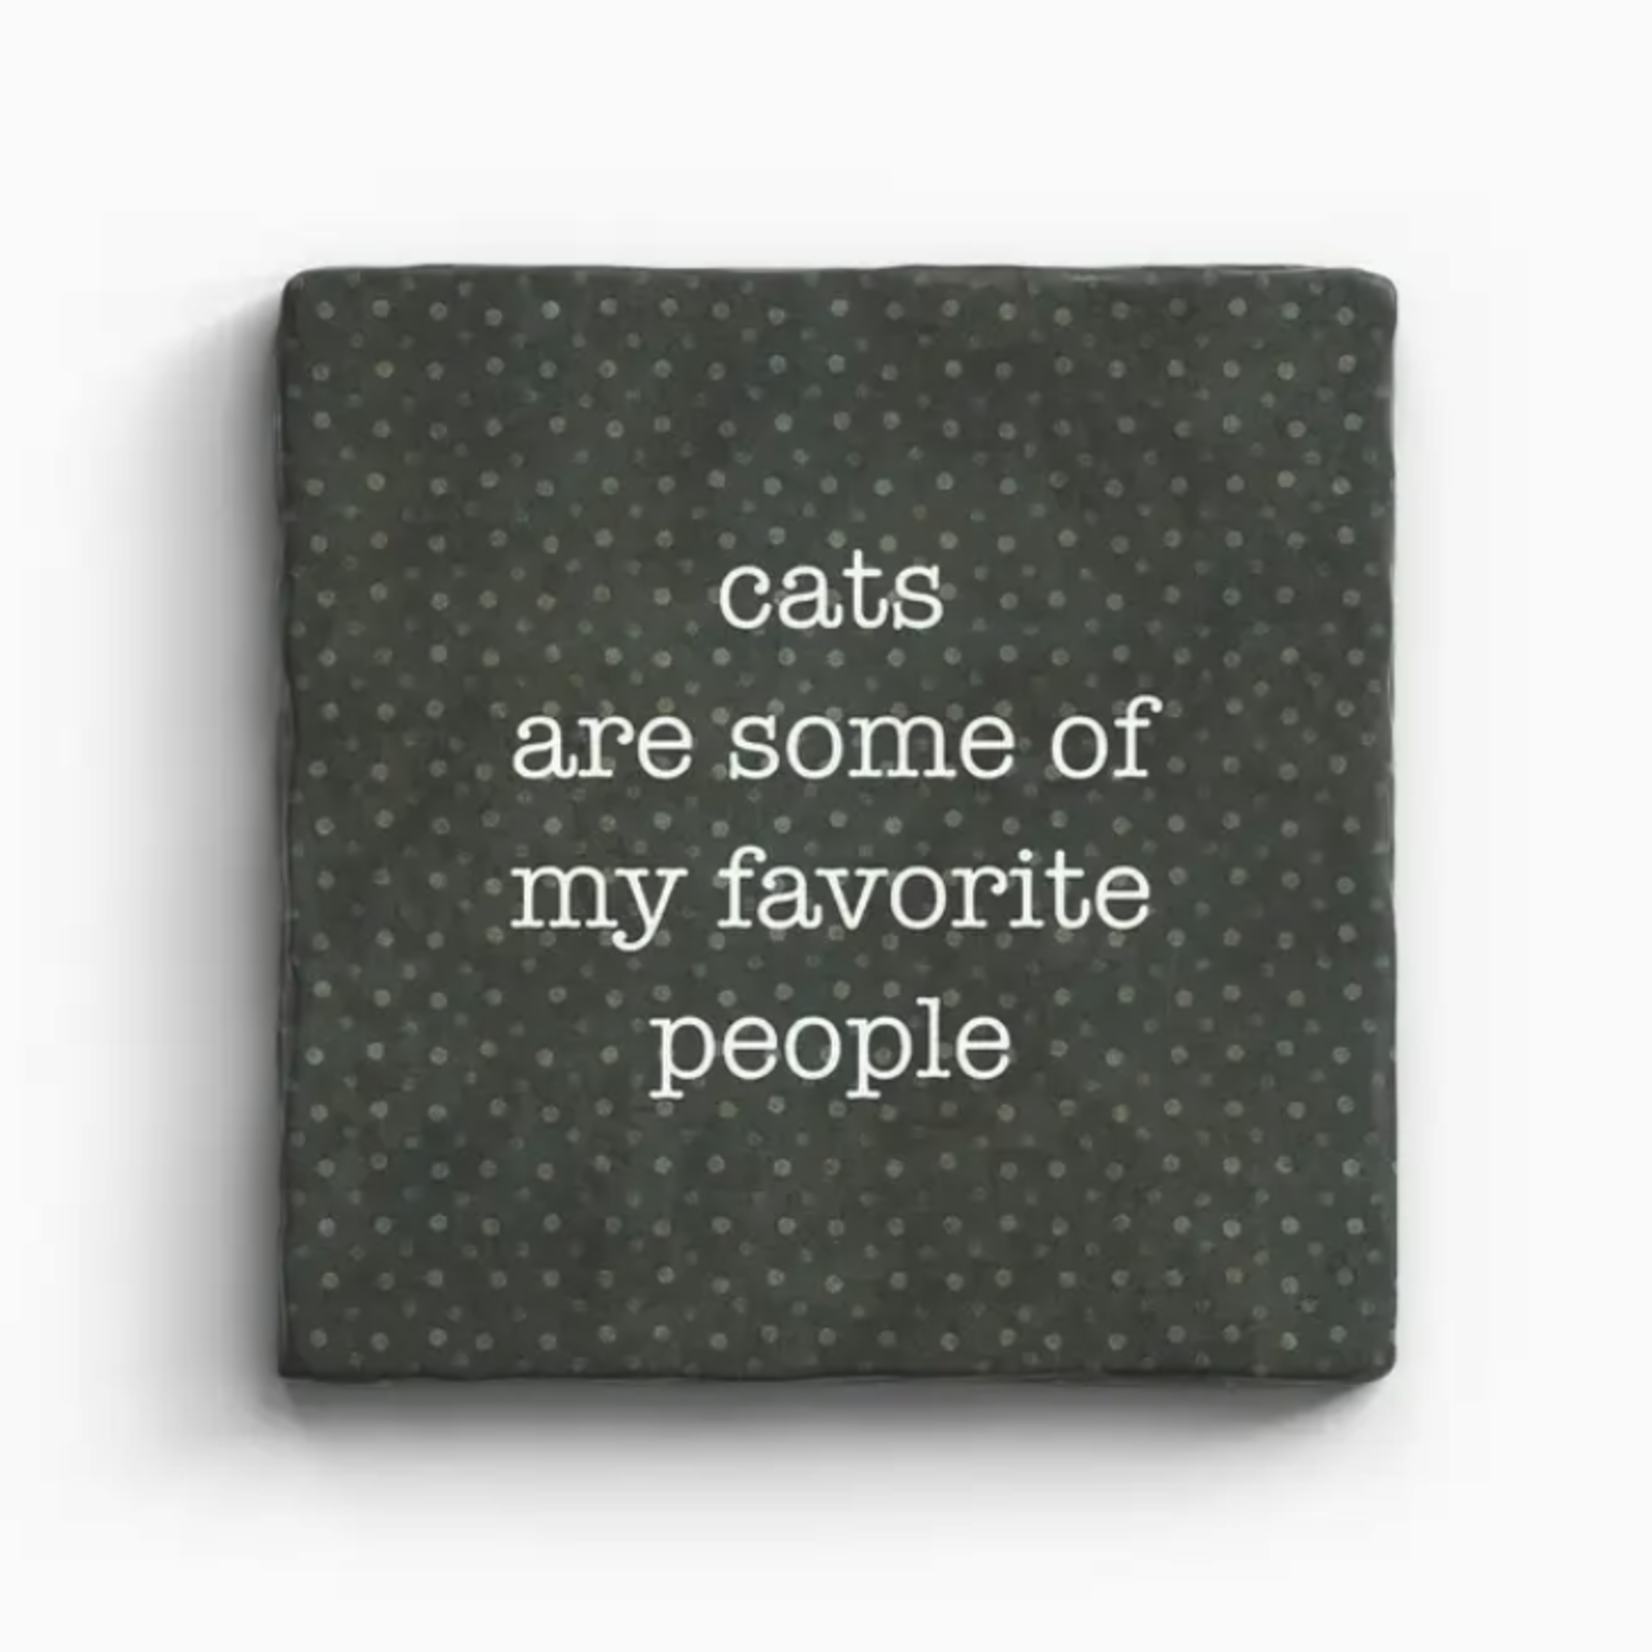 Paisley & Parsley Designs Coaster, Cats Favorite People